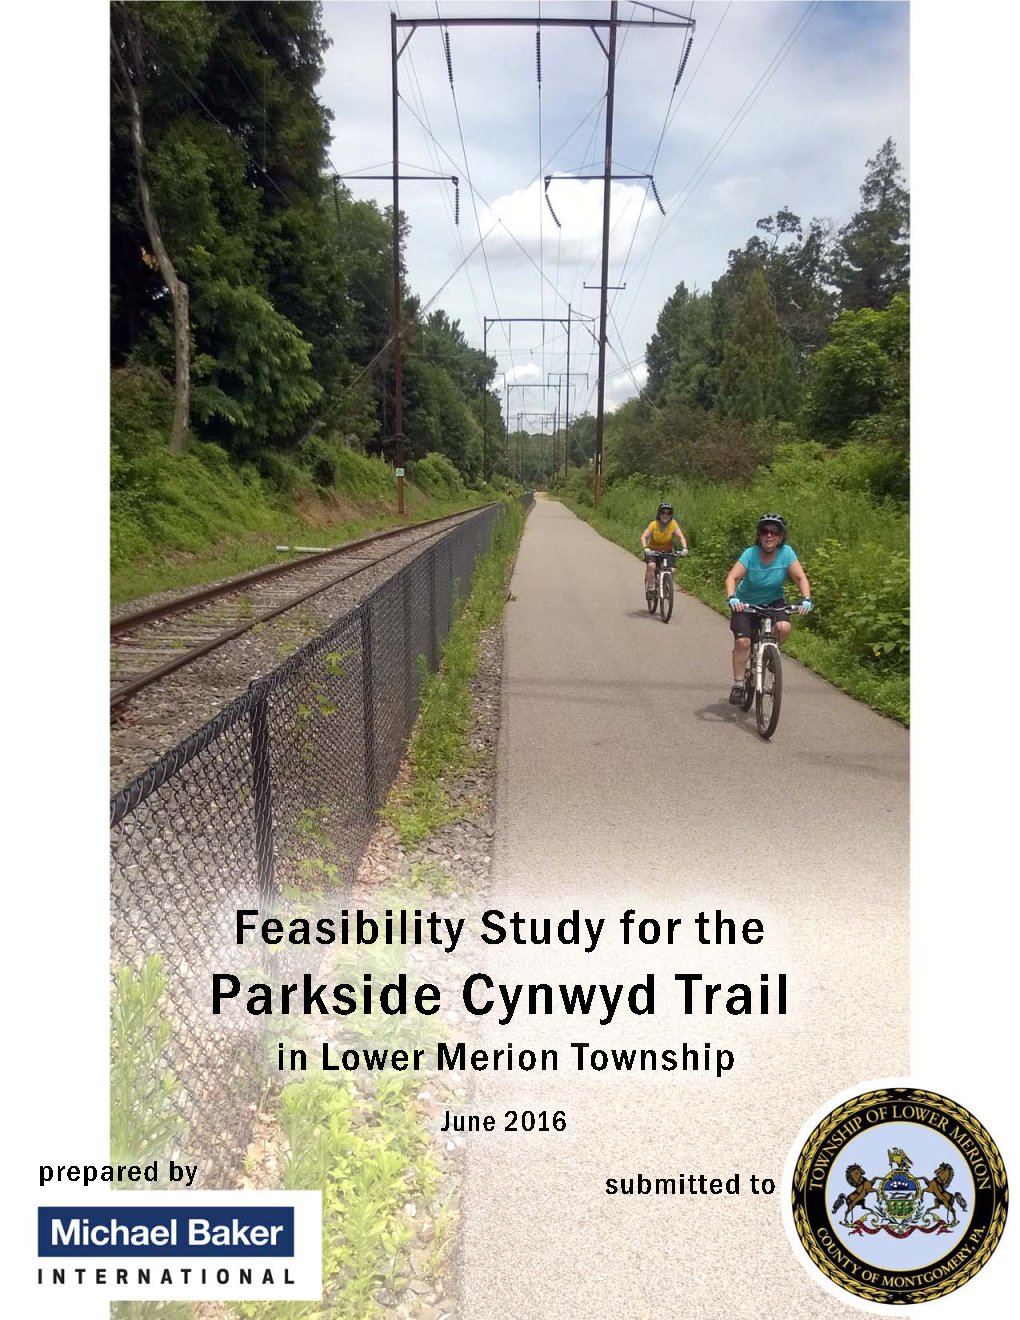 Feasibility Study for the Parkside Cynwyd Trail in Lower Merion Township